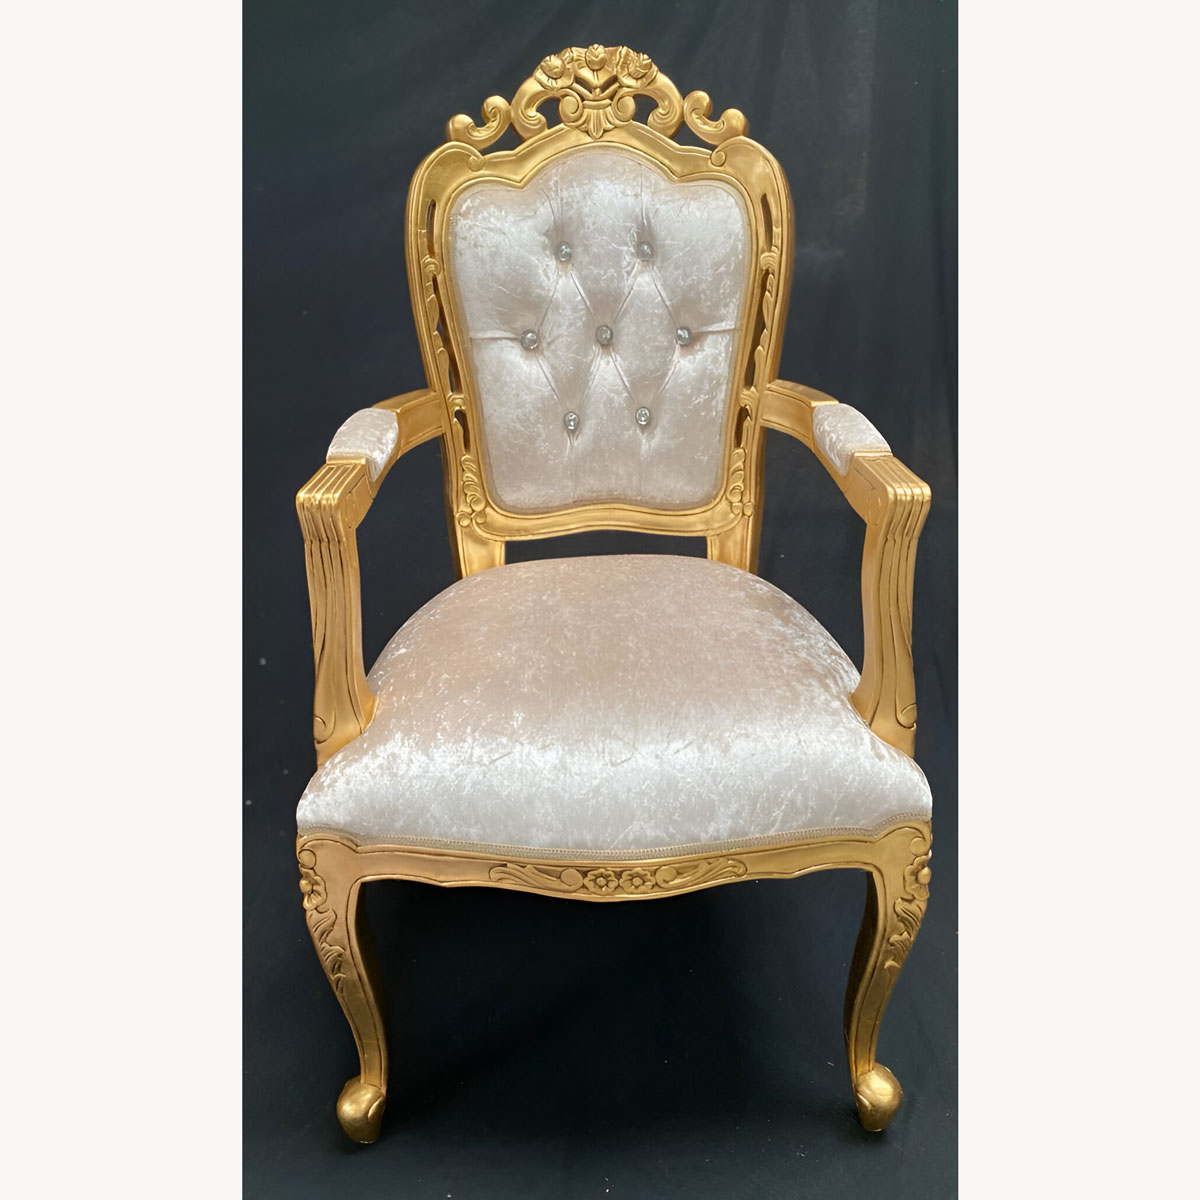 Franciscan Wedding Or Dining Chair With Arms Gold Leaf With Ivory Cream Crushed Velvet Fabric With Crystal Buttons 4 - Hampshire Barn Interiors - Franciscan Wedding Or Dining Chair With Arms Gold Leaf With Ivory Cream Crushed Velvet Fabric With Crystal Buttons -